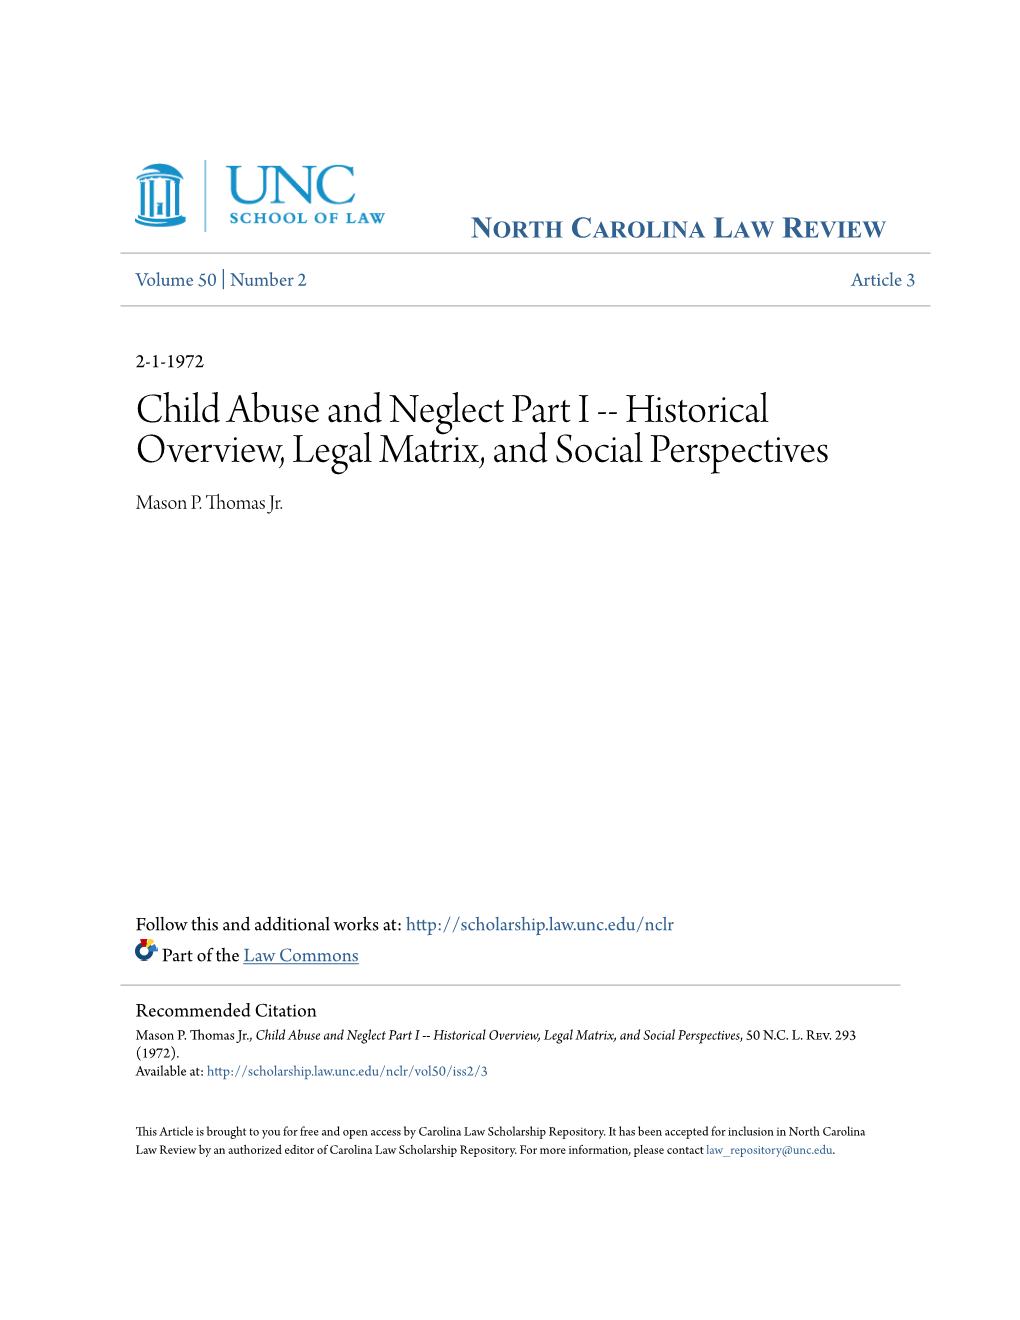 Child Abuse and Neglect Part I -- Historical Overview, Legal Matrix, and Social Perspectives Mason P